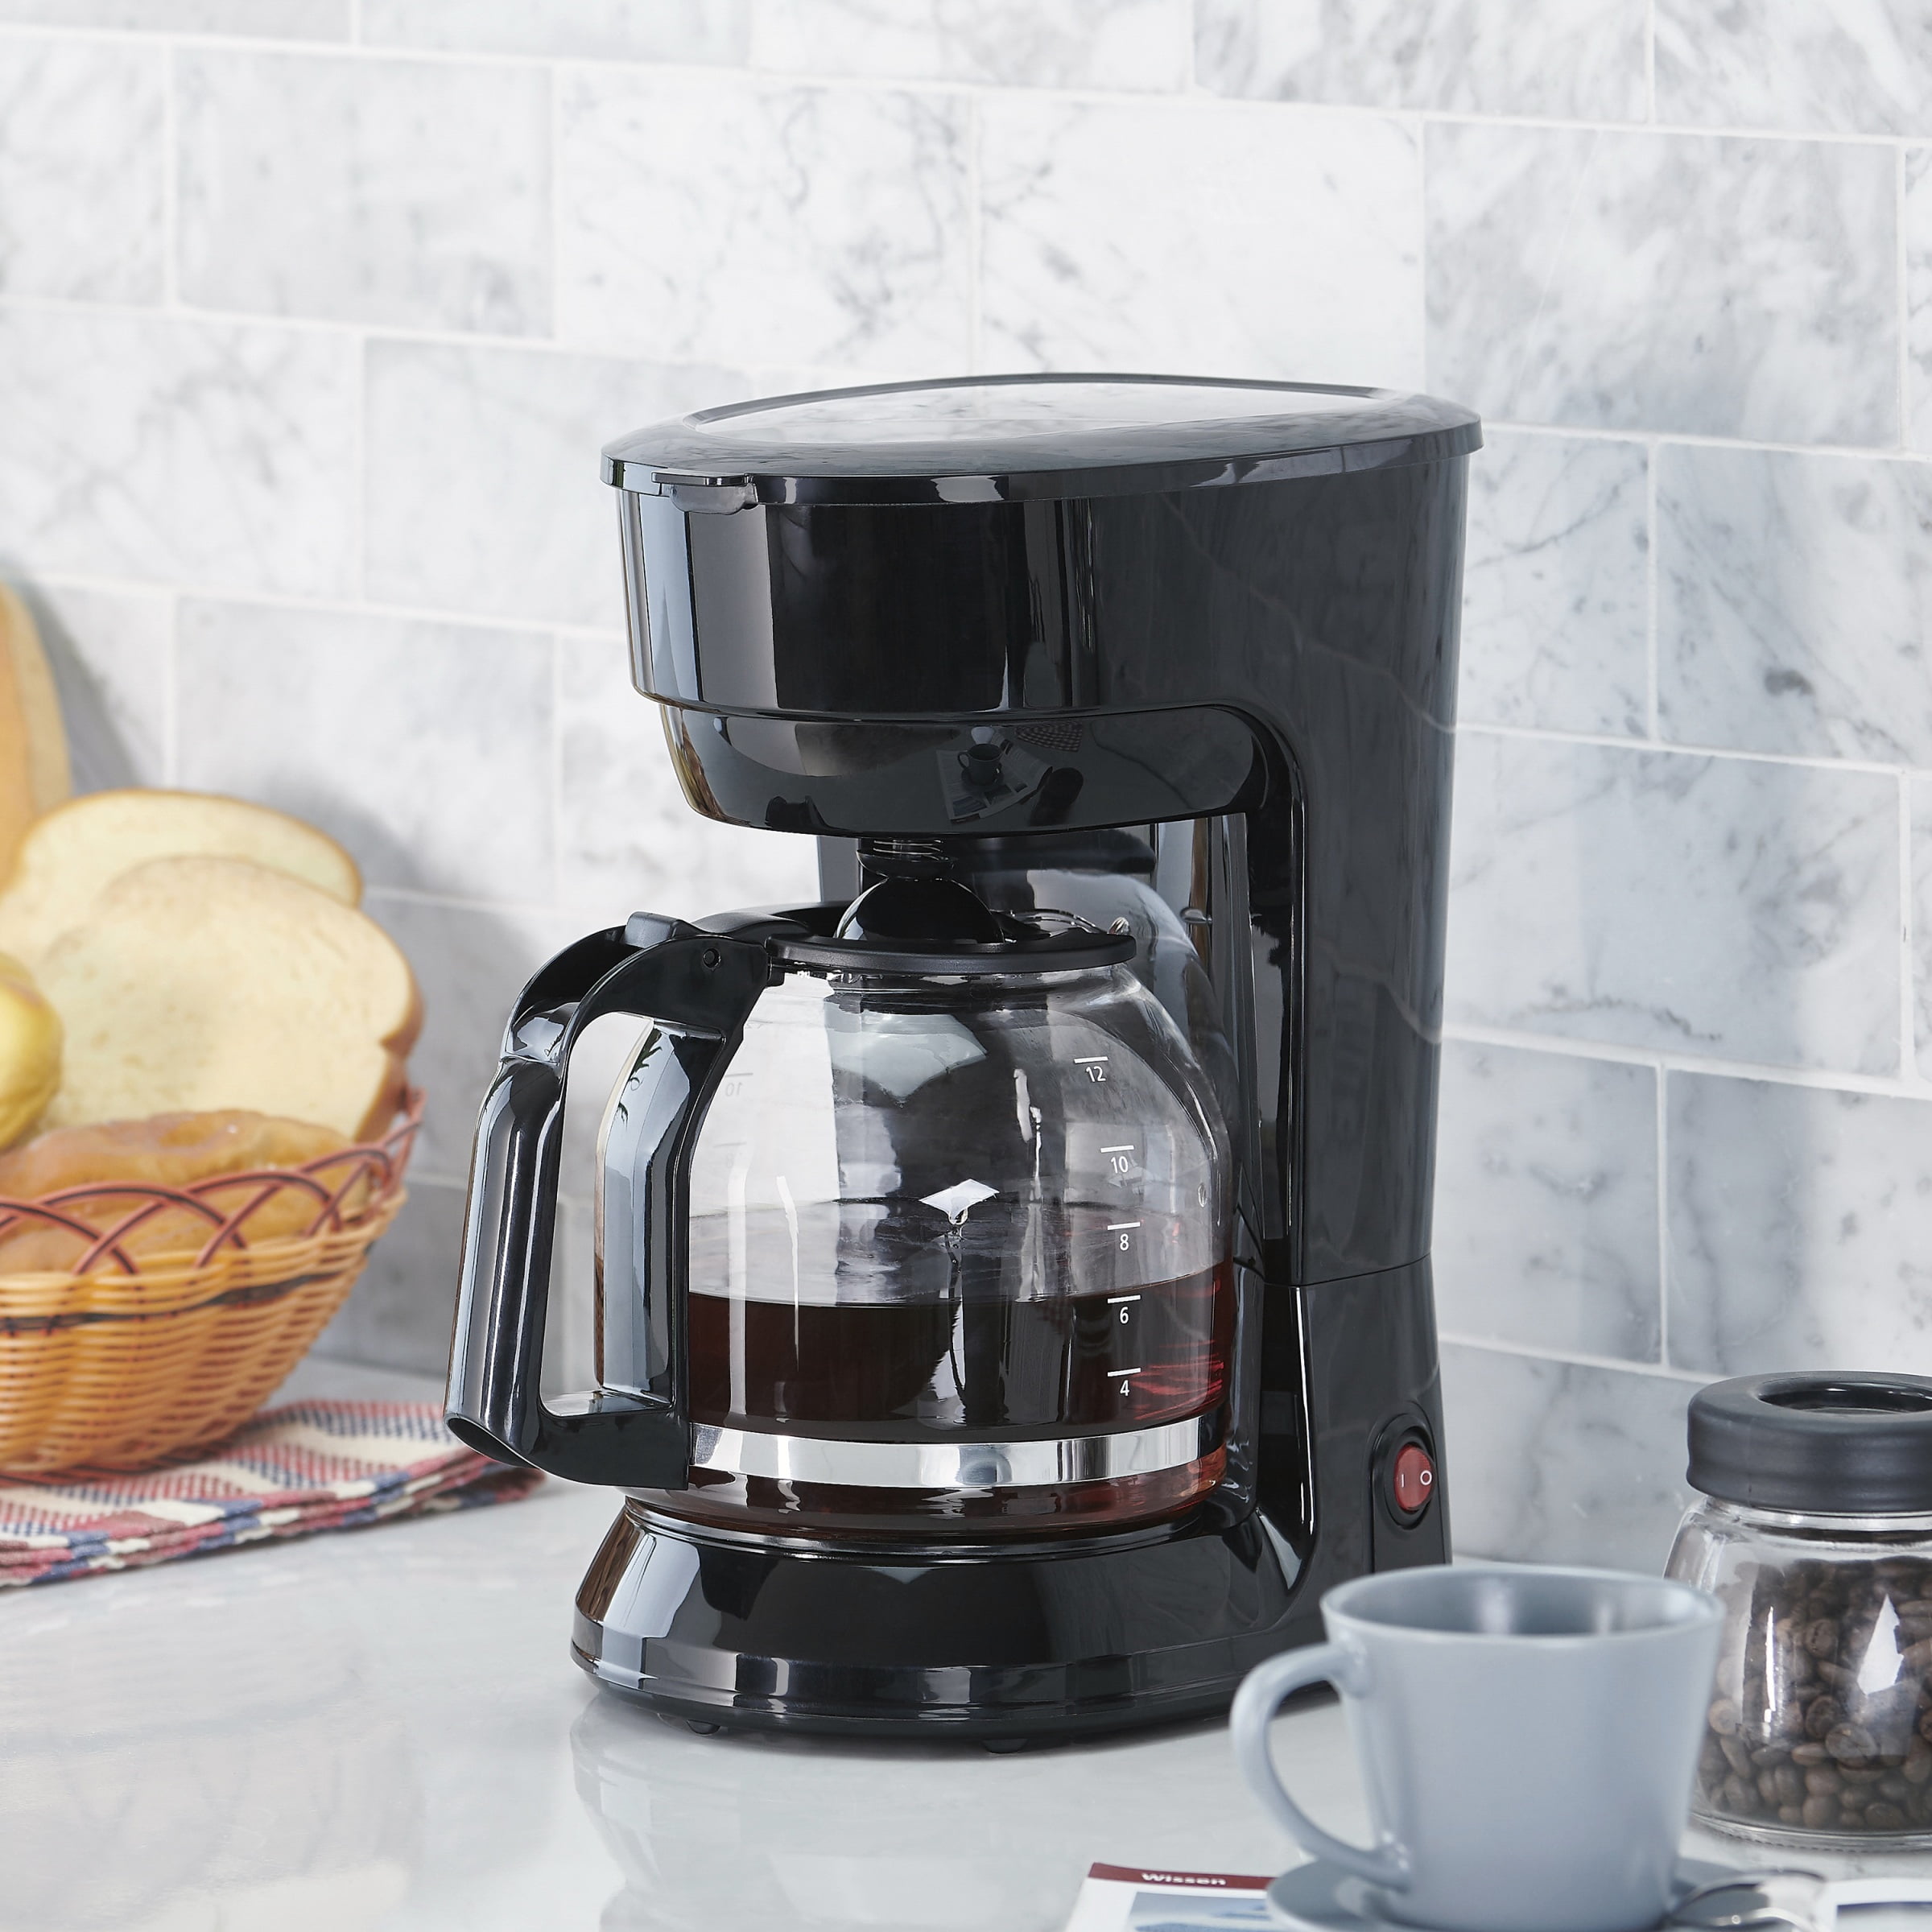 Review - Cheap Coffee Maker - Walmart Mainstays 5 Cup 